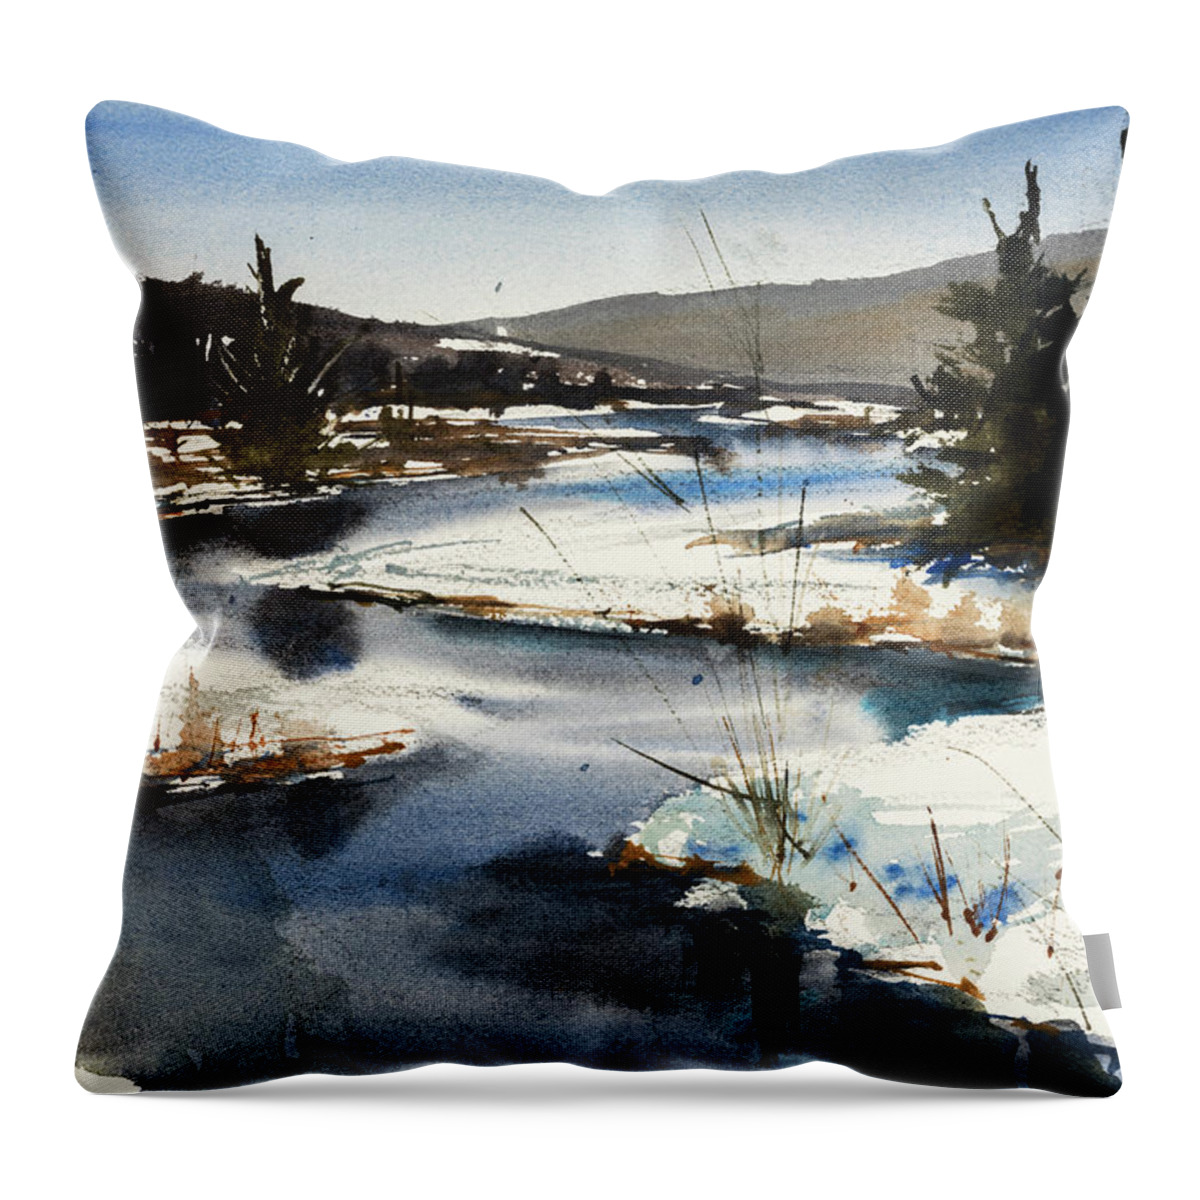 This Is One Of My Favorite Spots In Old Forge Ny. It's The View From Green Bridge Of The Moose River. I've Painted It In Every Season. This Is Actually April Throw Pillow featuring the painting Winter Moose by Judith Levins